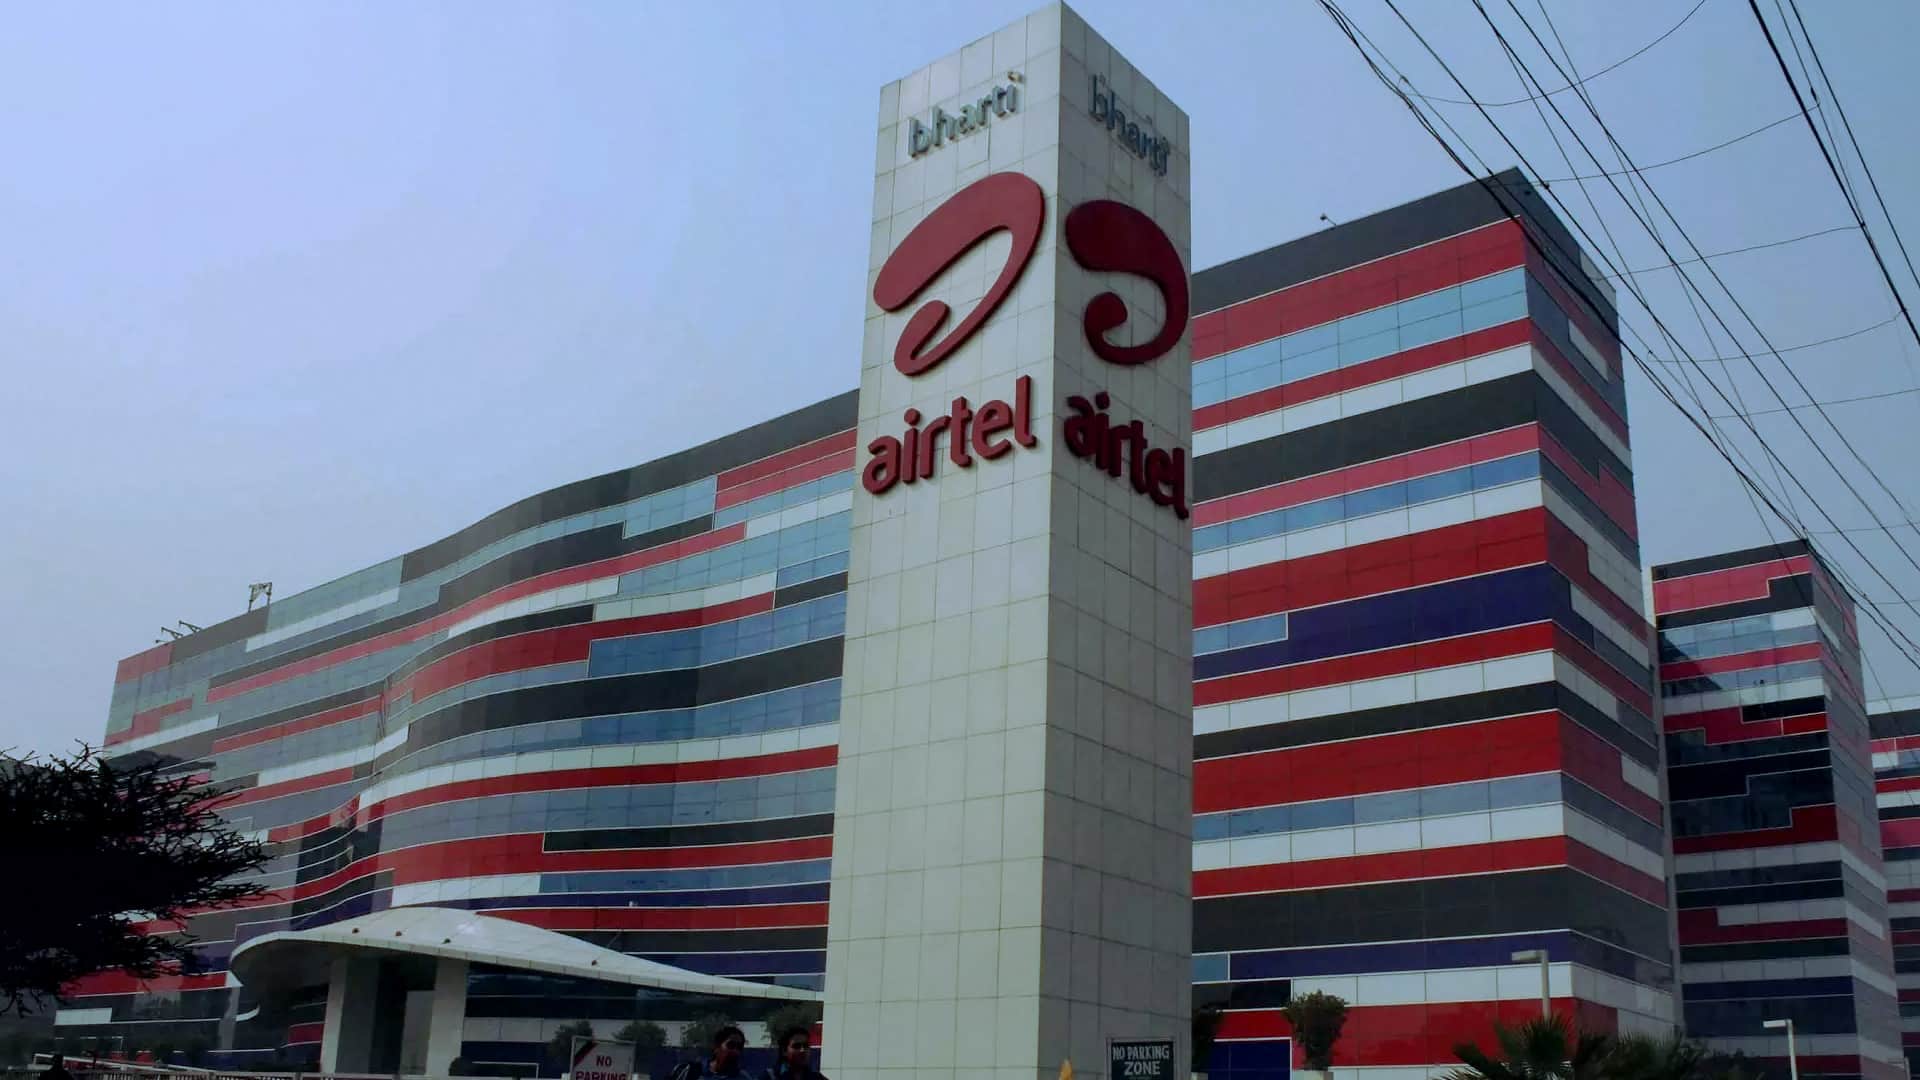 Airtel offers free talk time to low-income customers as Covid support initiative